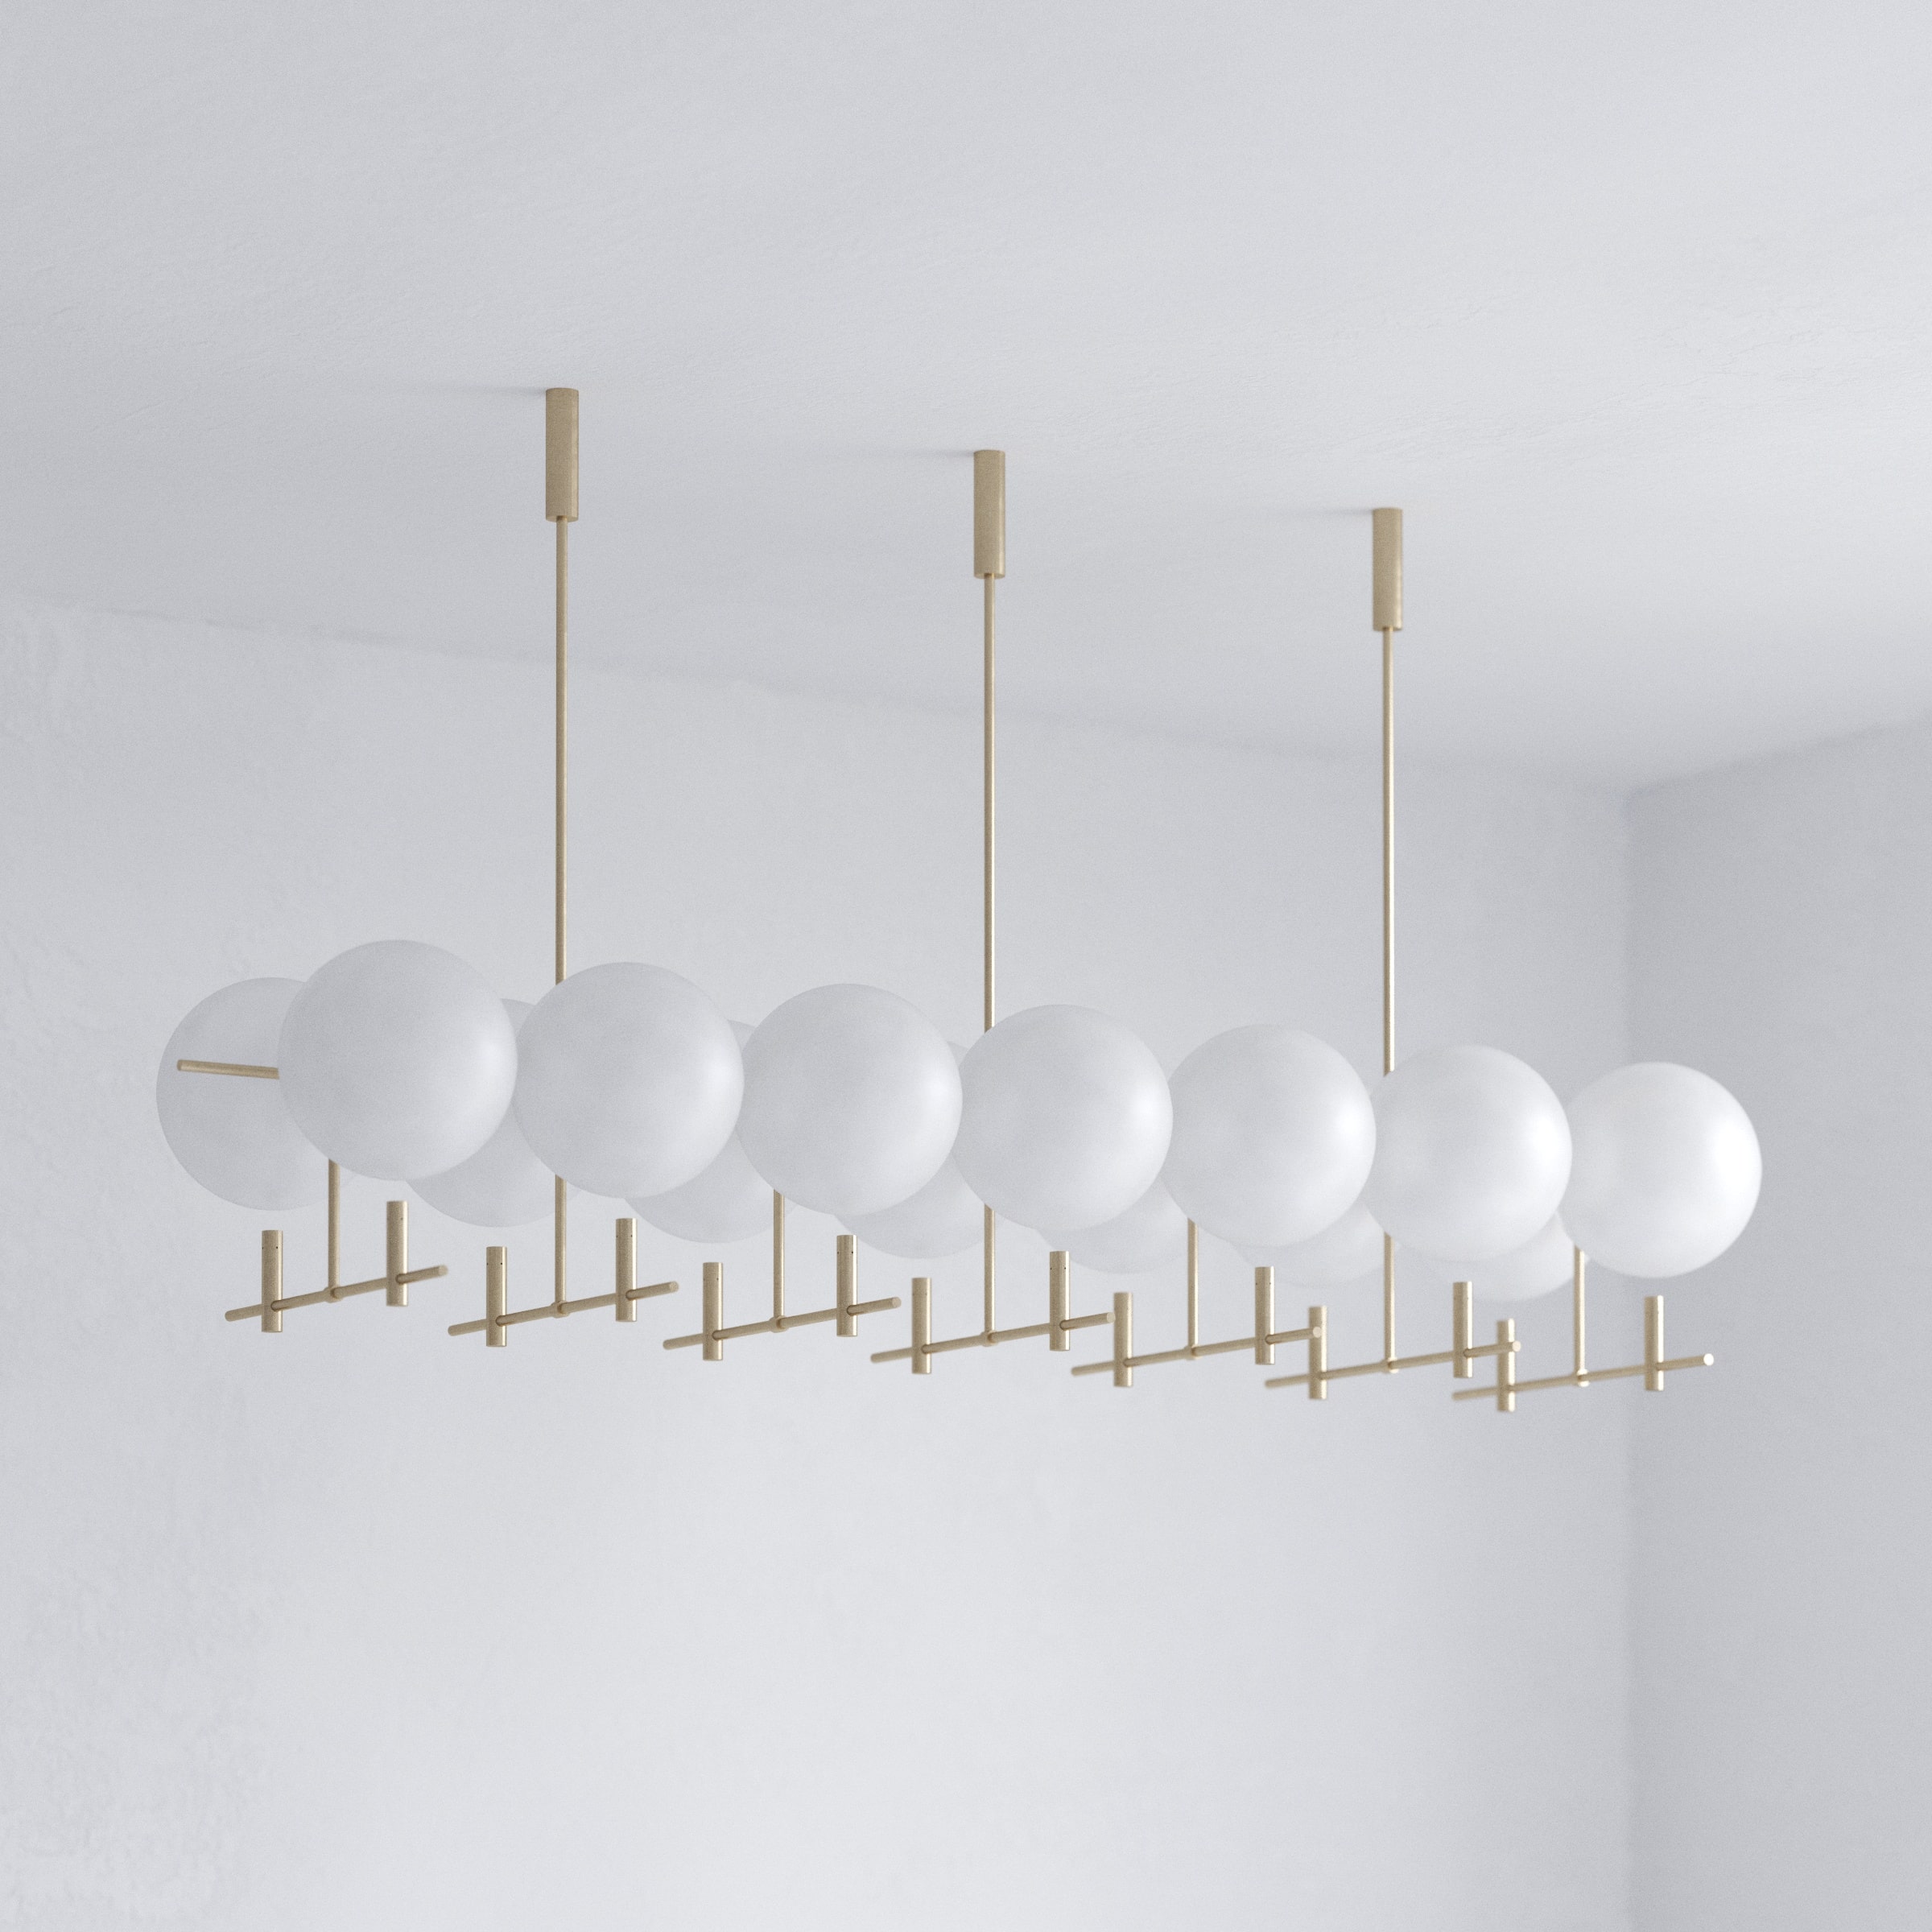 Luna-luminaries-collection-of-lighting-made-of-glass-in-combination-with-brass-hand-crafted-and-designed-locally-in-the-czech-republic-design-by-jiri-krejcirik-dimmable-led-sources-direct-and-ambient-interior-illumination-